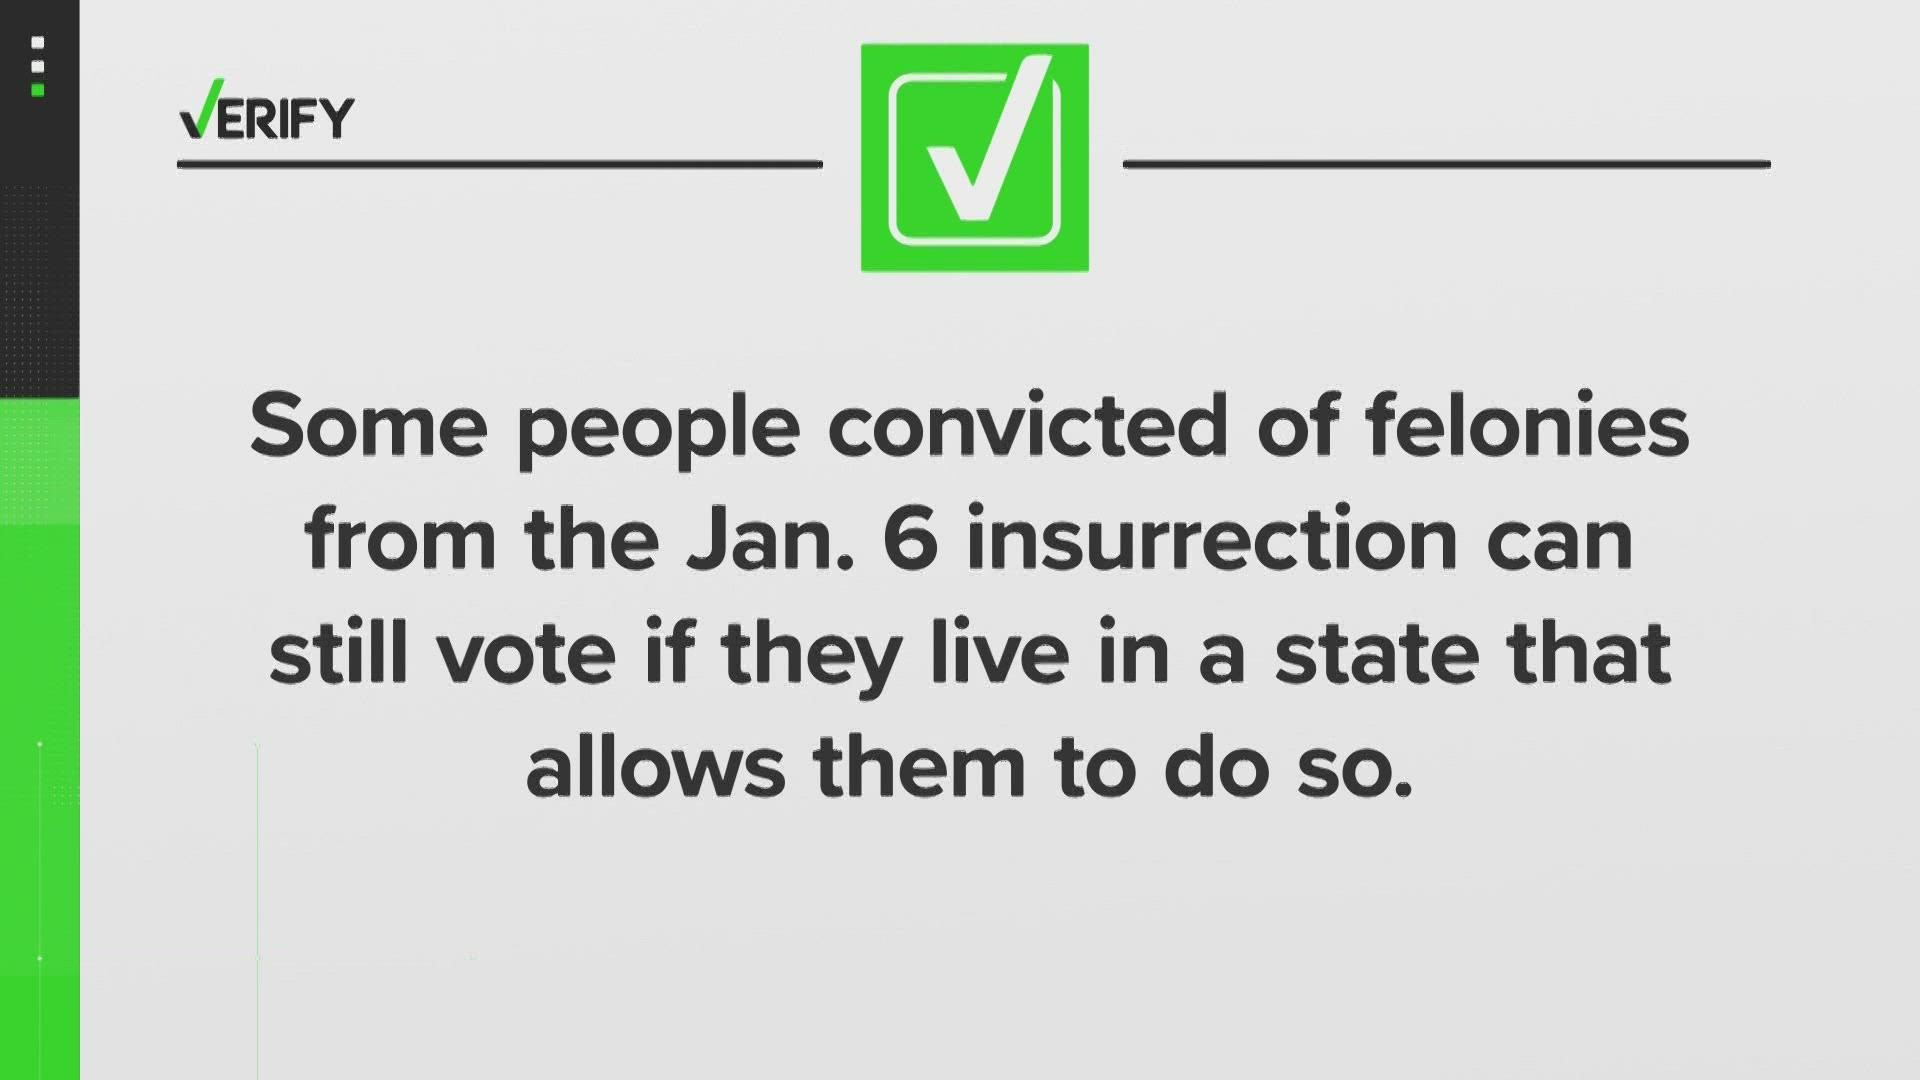 In most states, people convicted of a felony are disenfranchised while they are incarcerated but get their voting rights back after finishing their sentences.